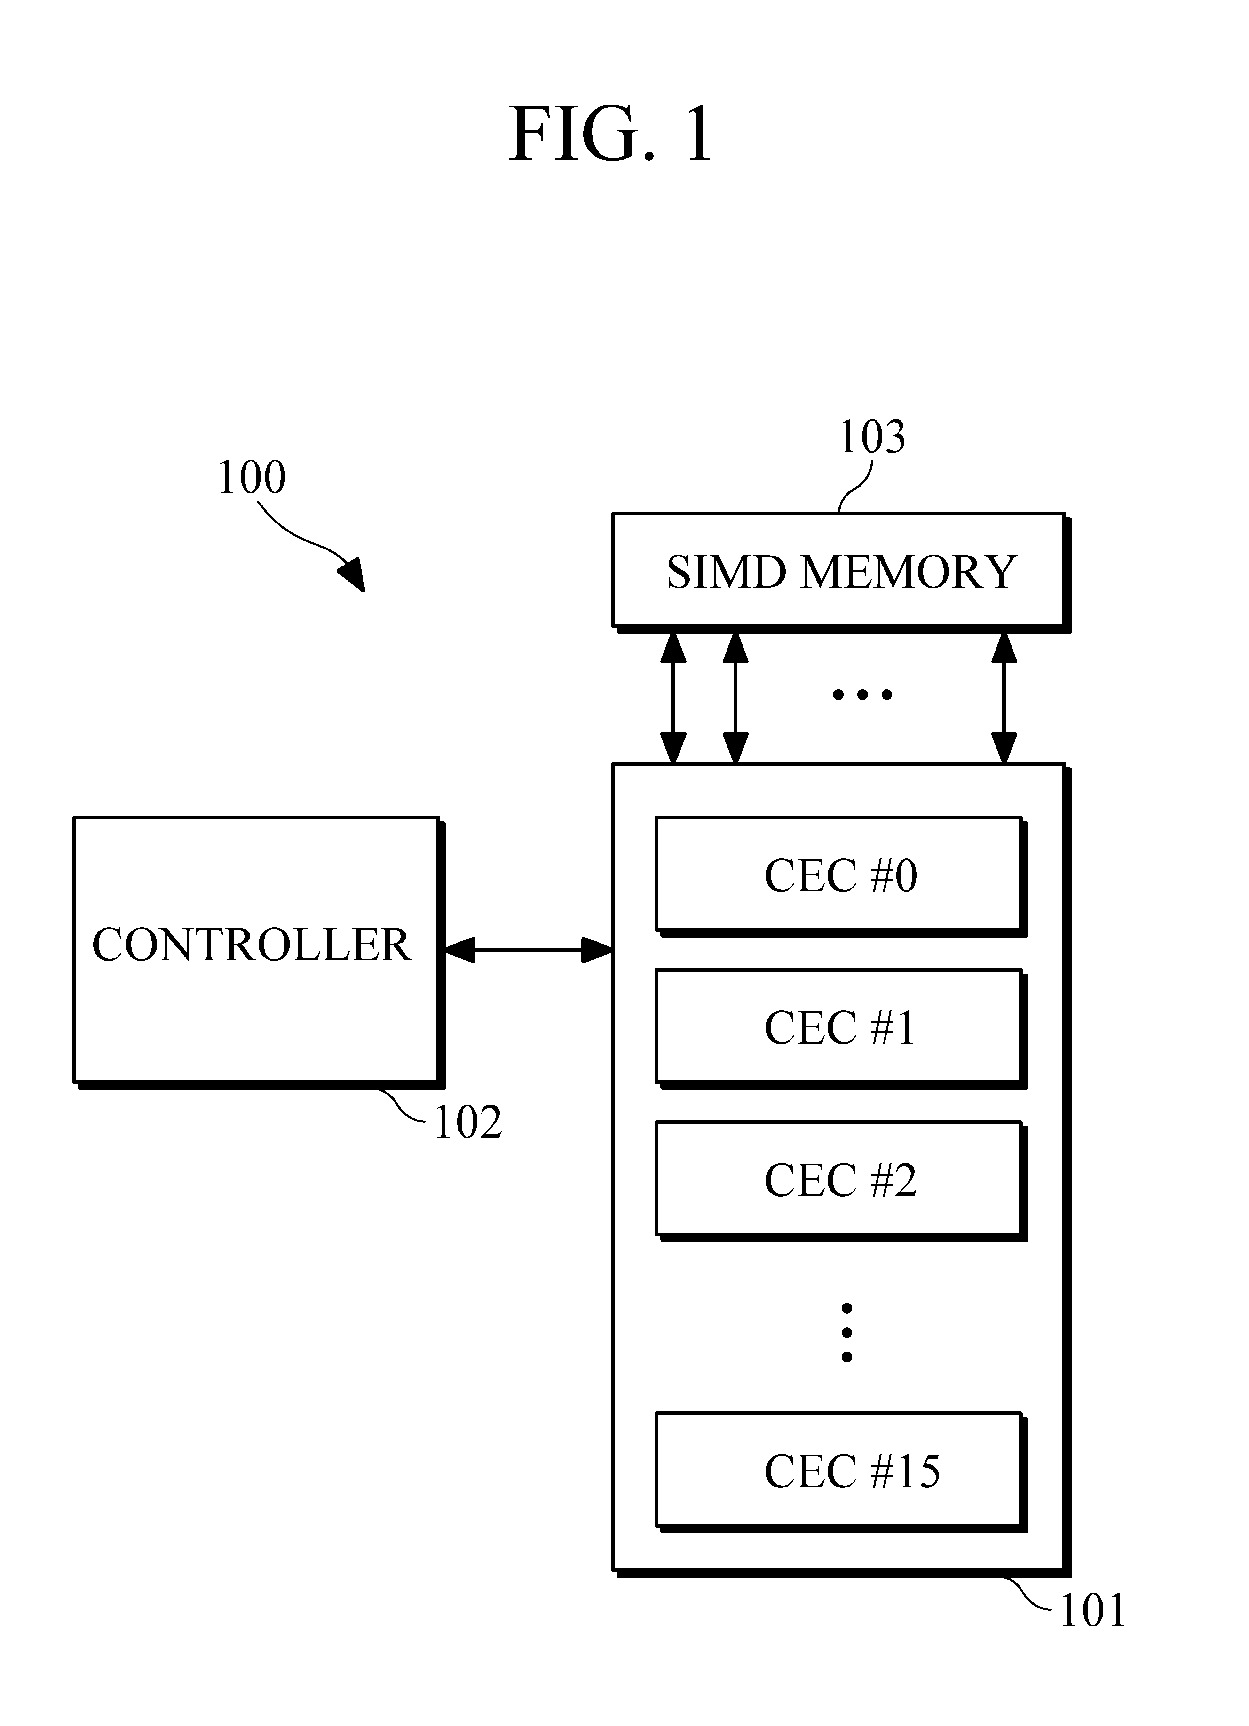 Computing apparatus and method based on a reconfigurable single instruction multiple data (SIMD) architecture